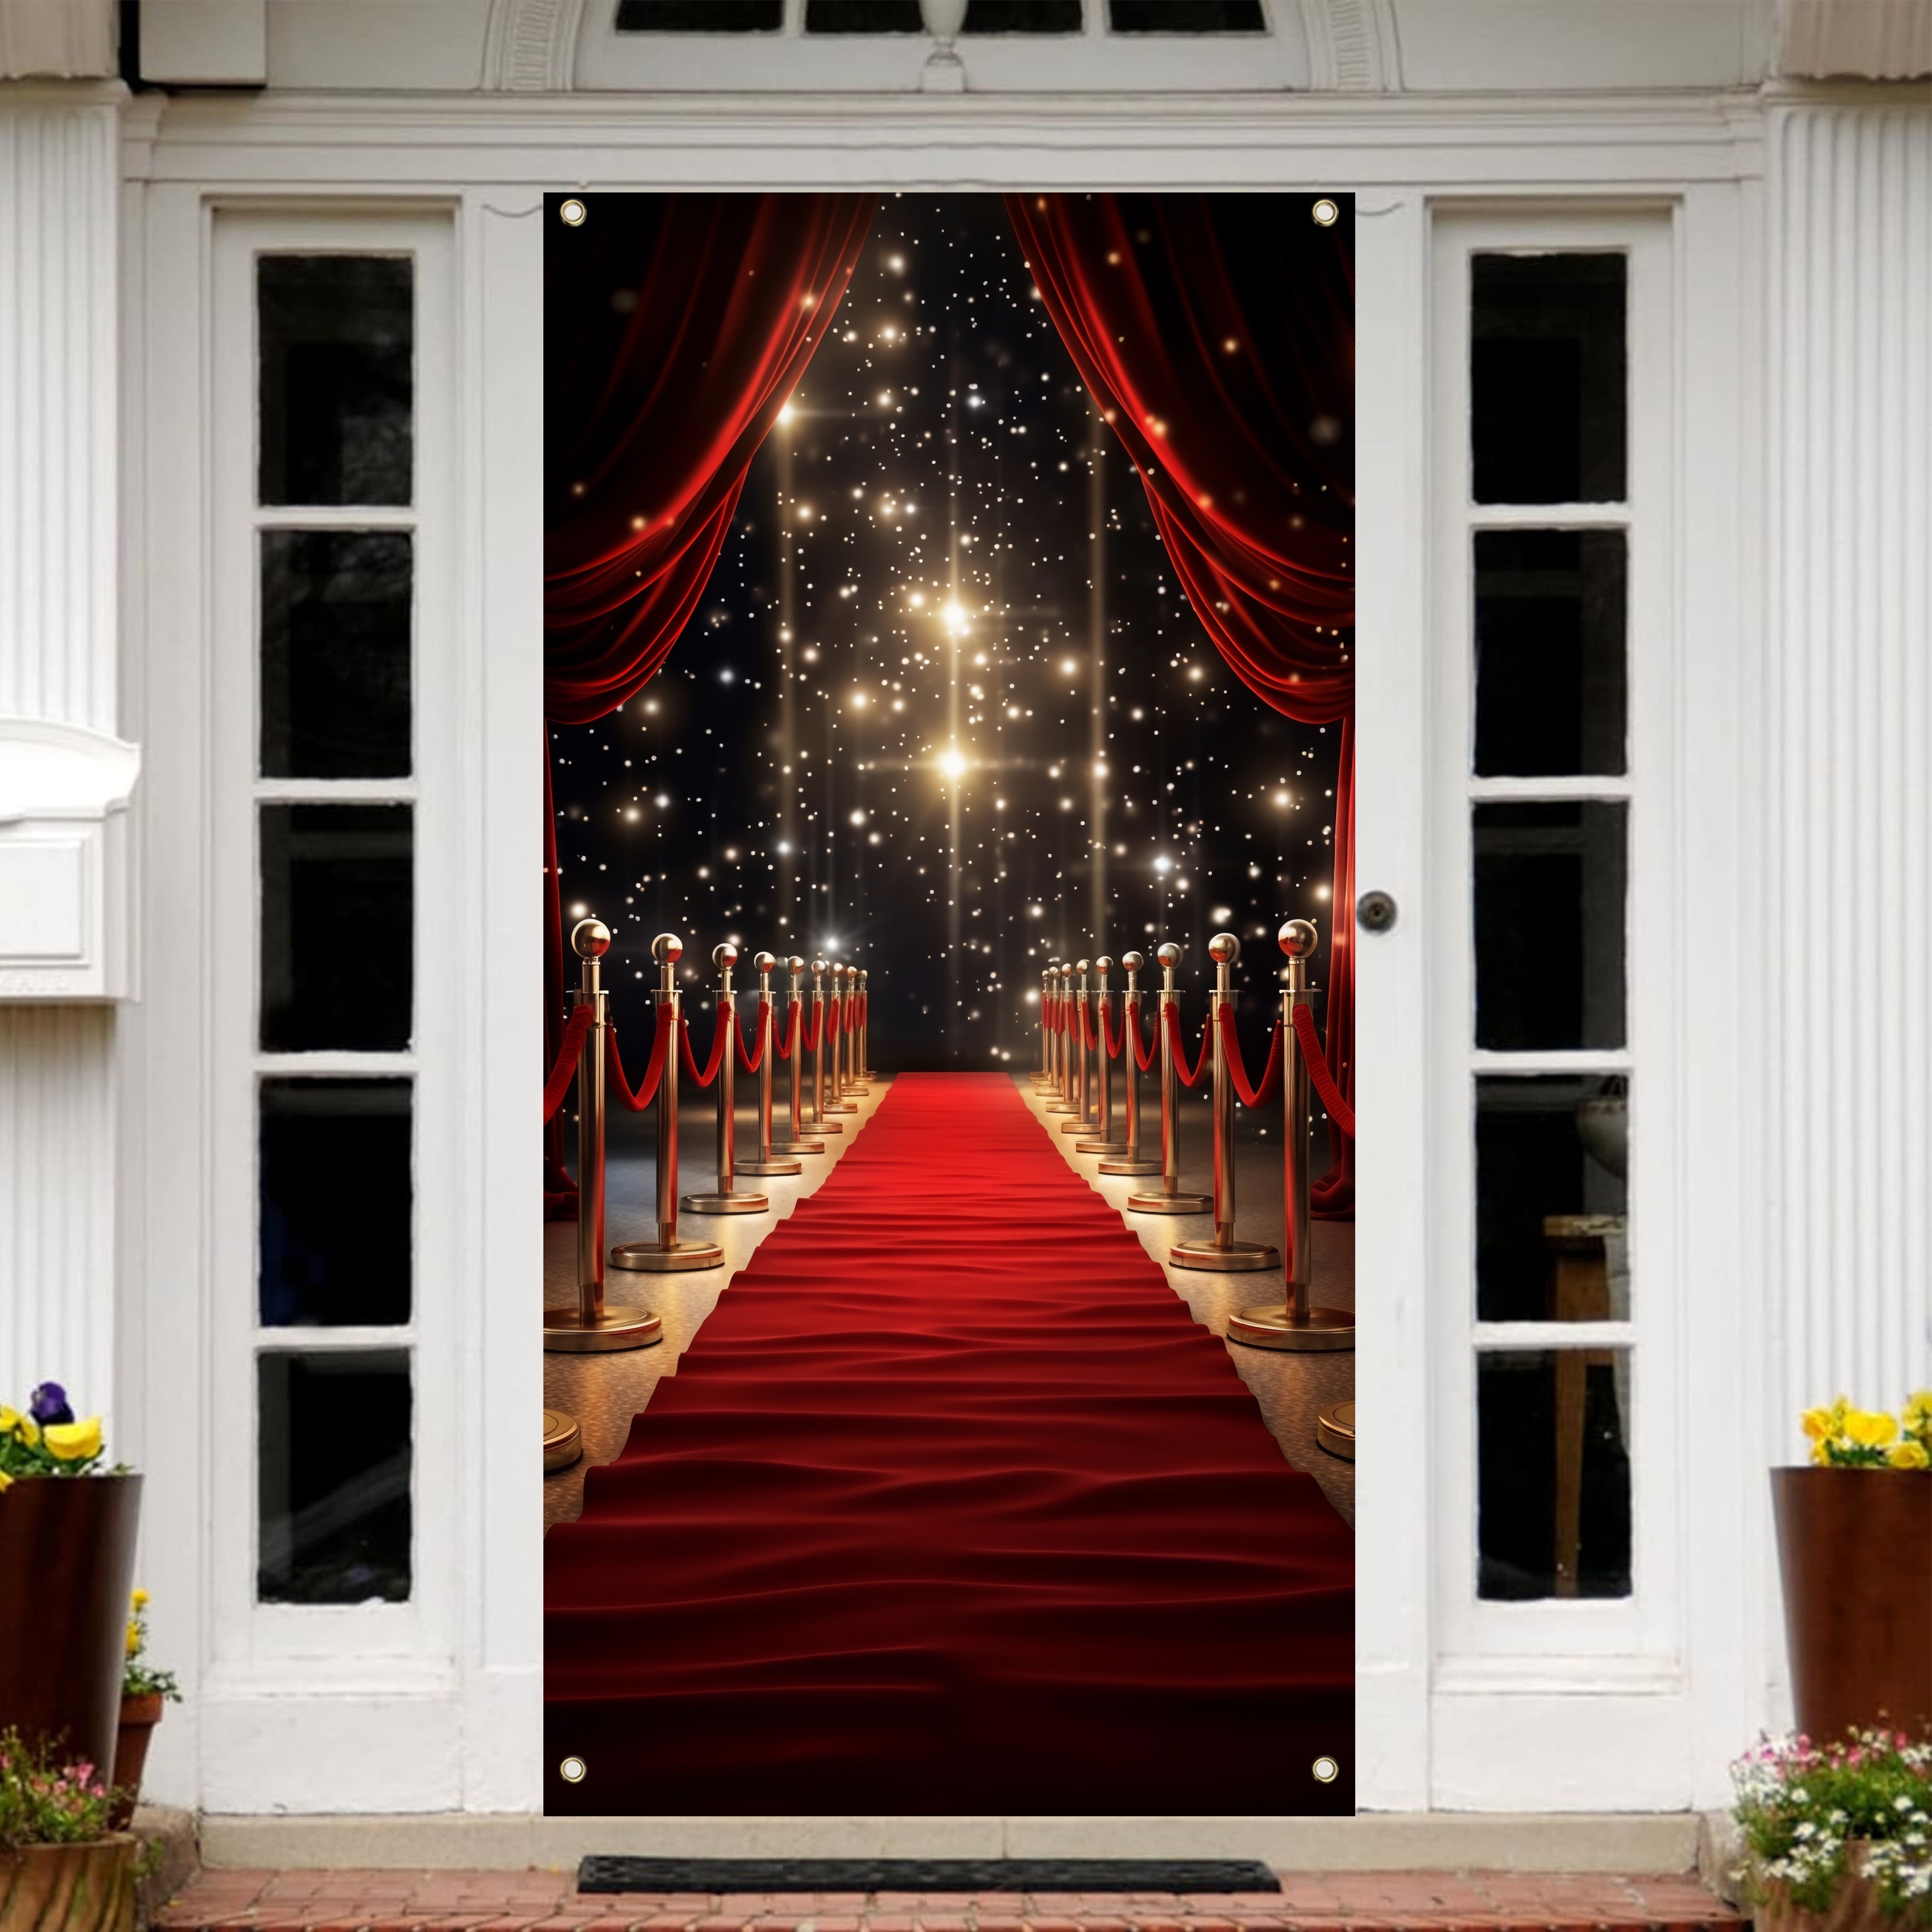 

1pc 70x35 Inch Red Carpet Theme Door Cover Party Decorations Backdrops Red Carpet Backgrounds Door Banner Background Backdrops For Wedding Birthday Party Door Backdrop Decoration